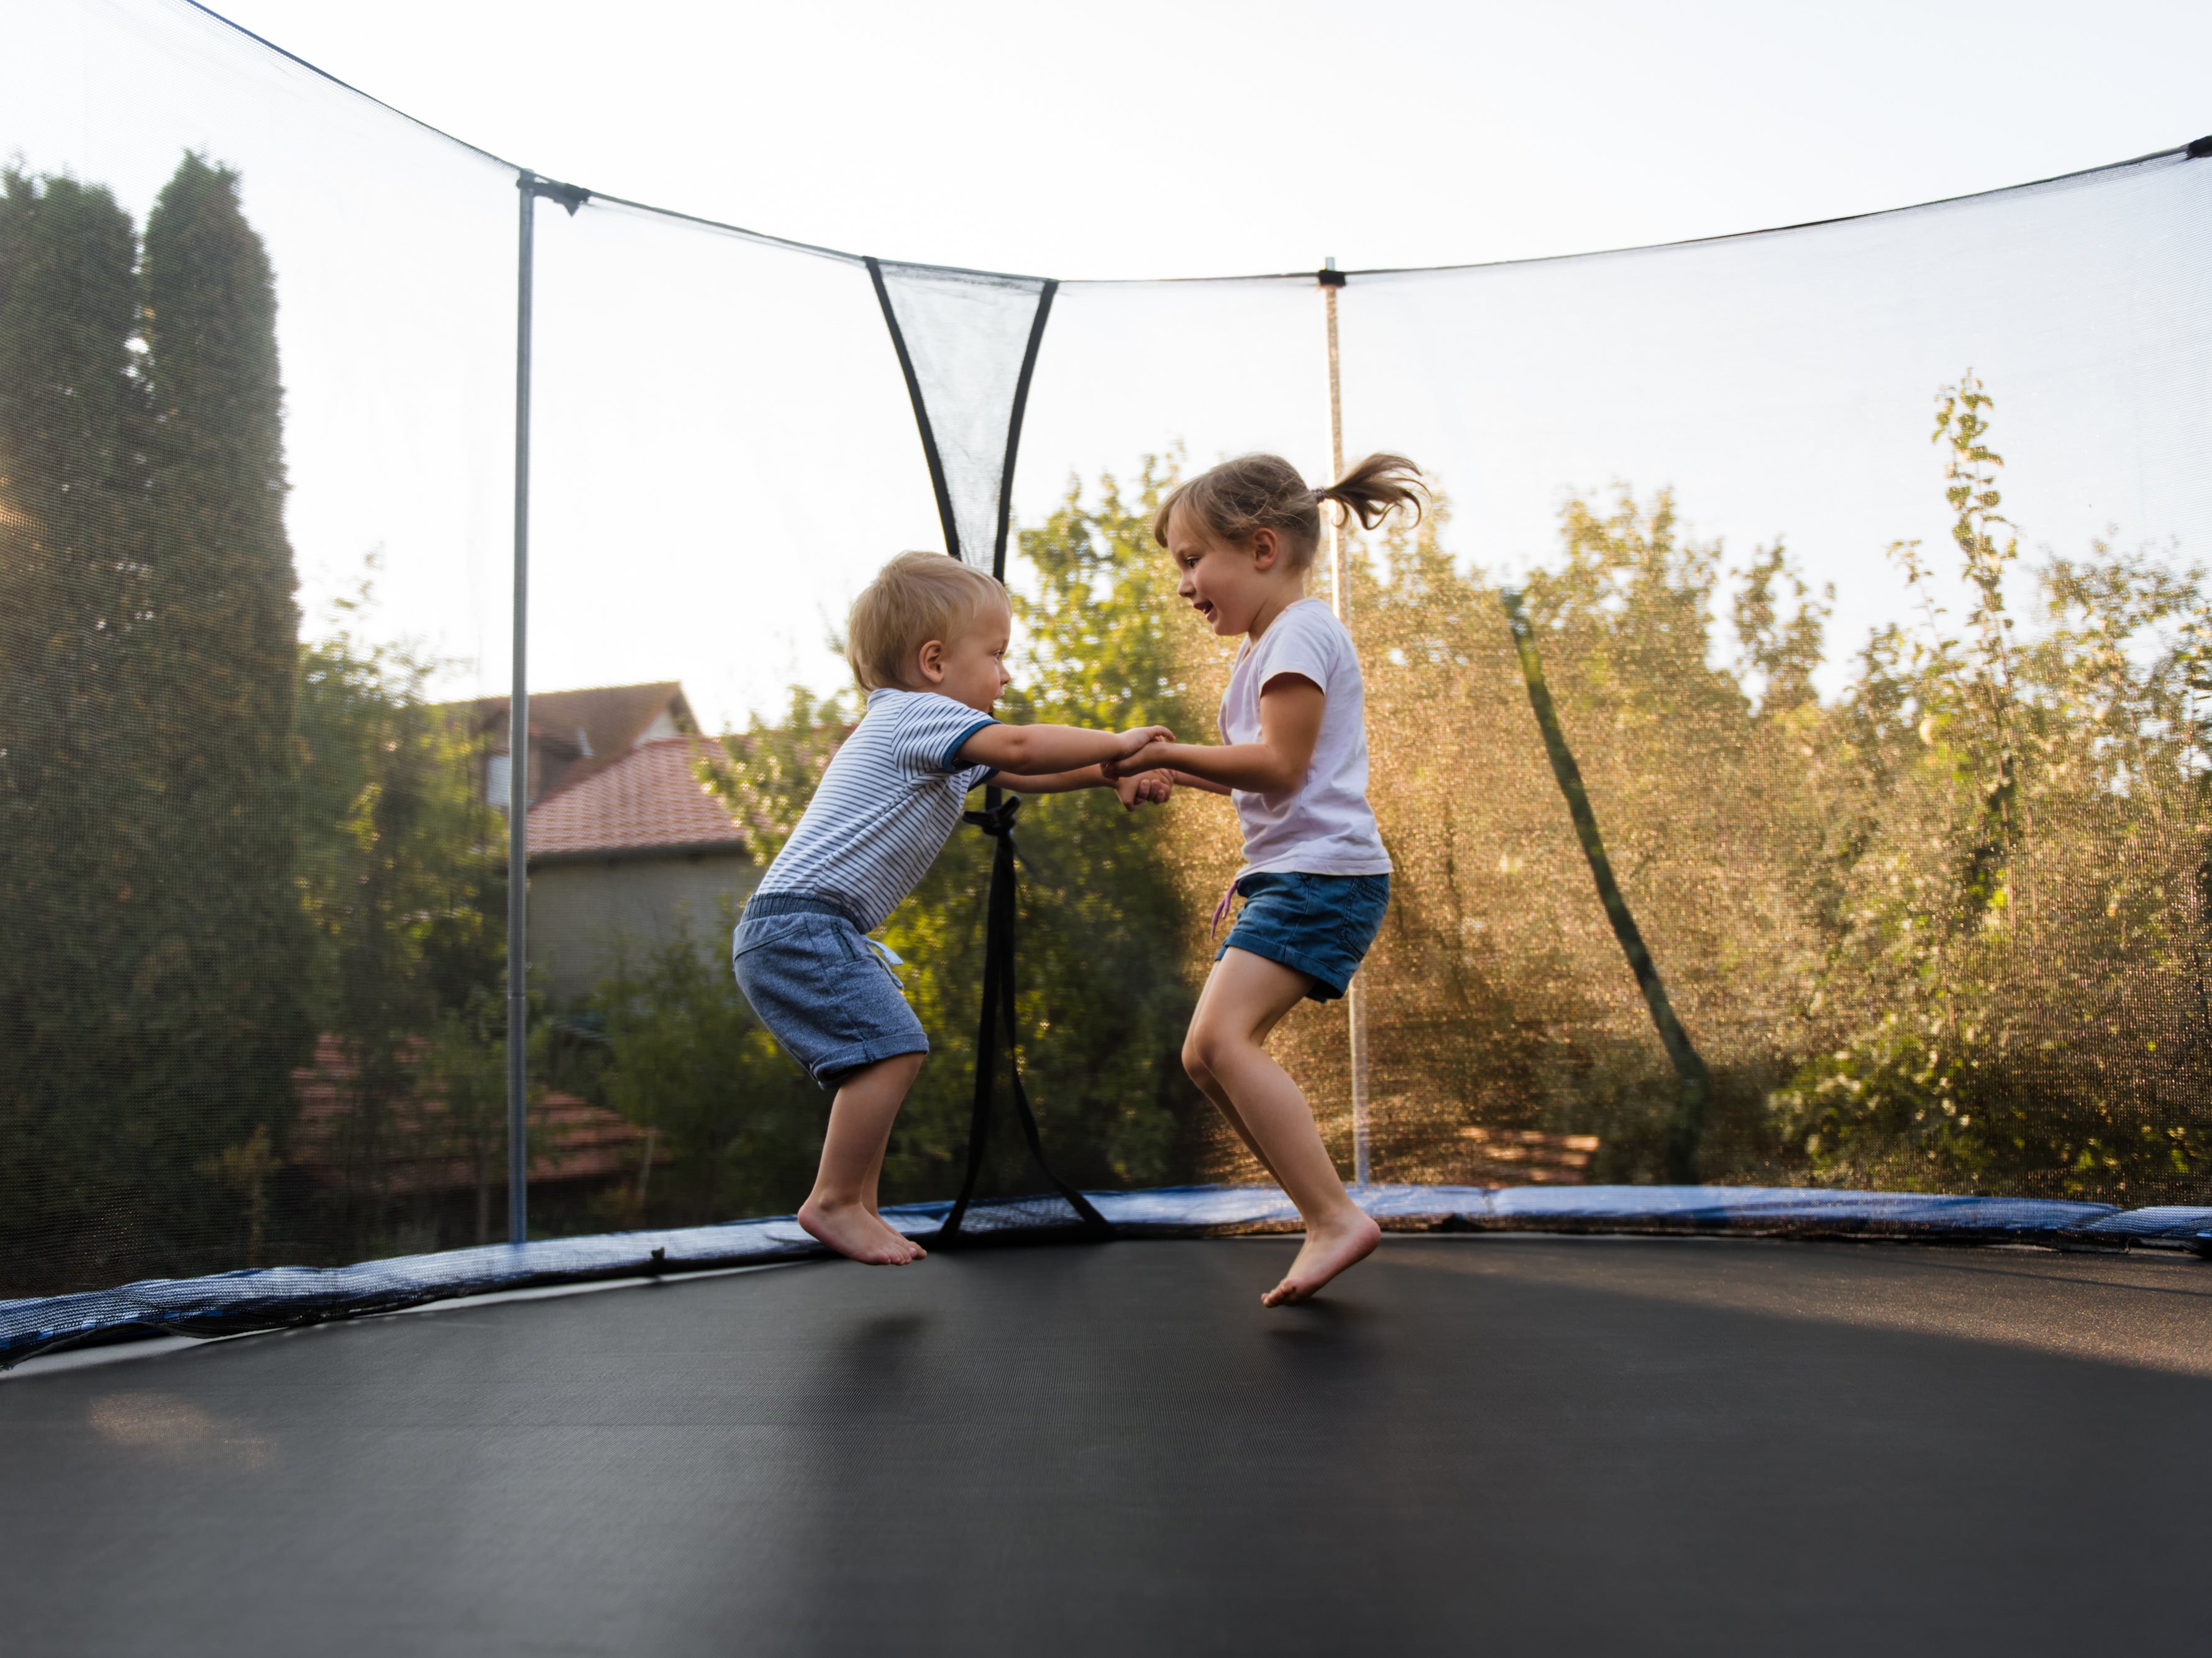 Trampolining is to blame for half of all activity-related A&E admissions in under-14s, according to a study